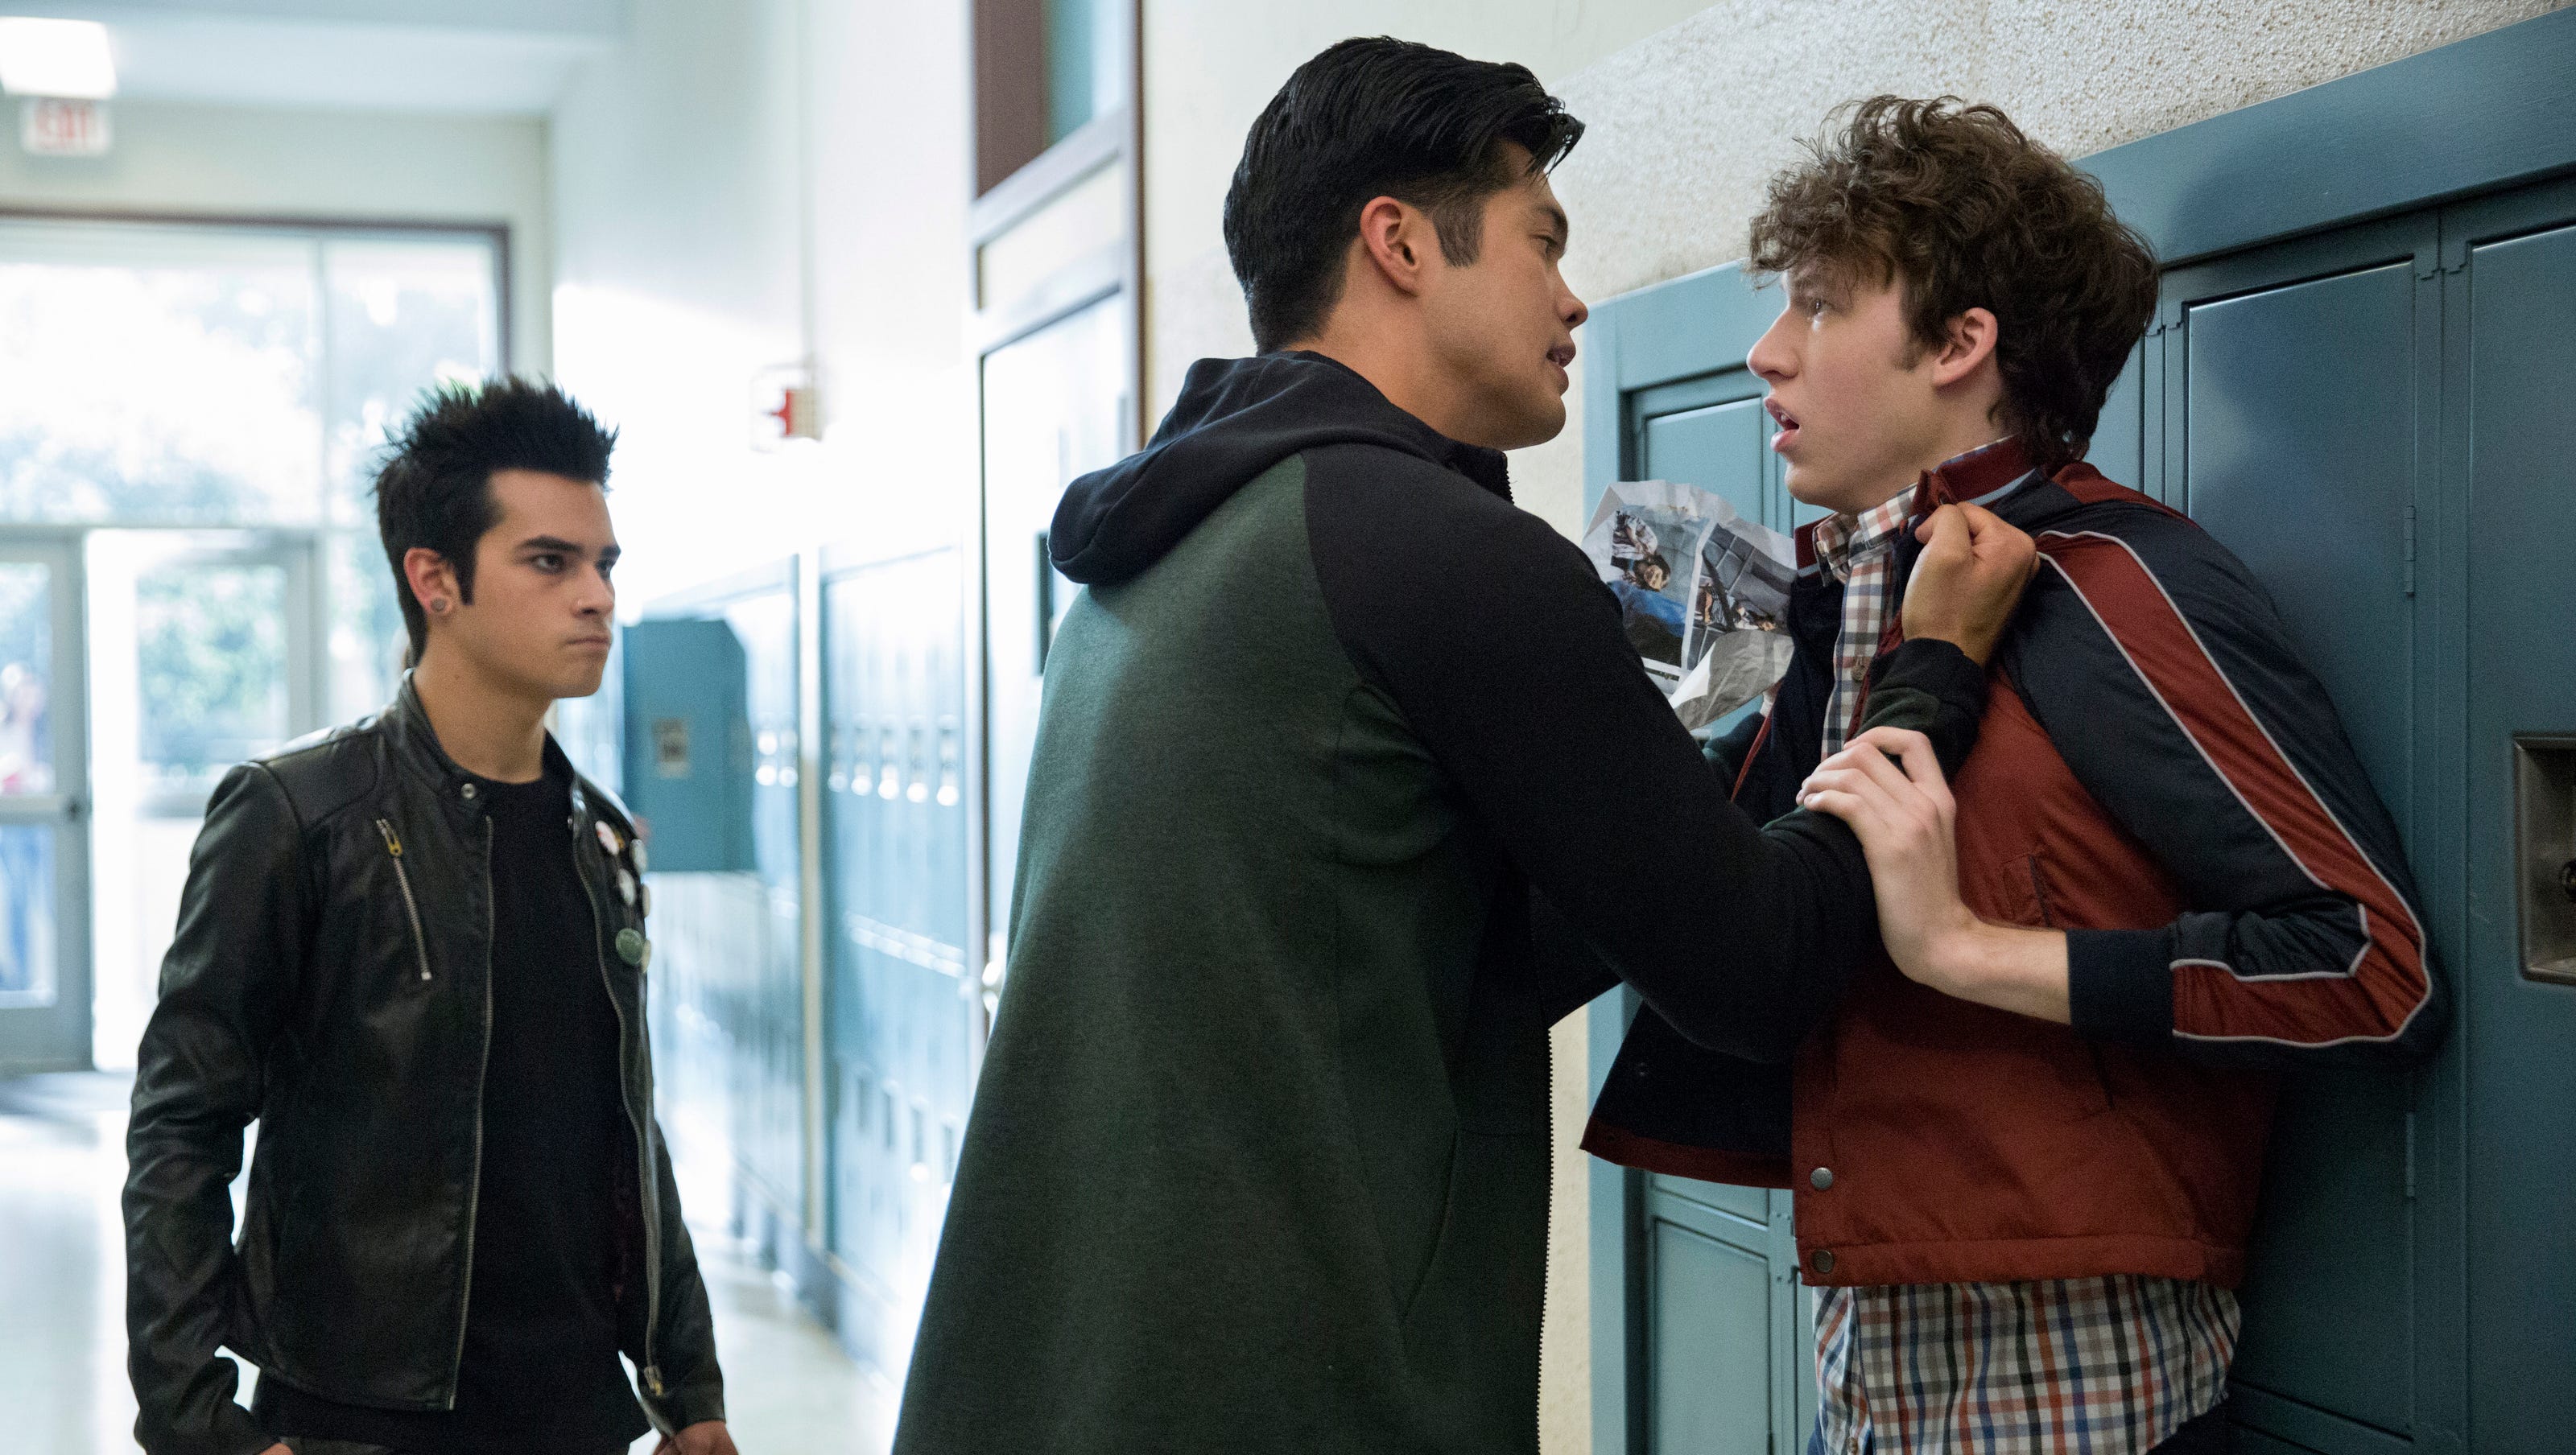 Netflix Cancels 13 Reasons Why Event After Texas High School Shooting